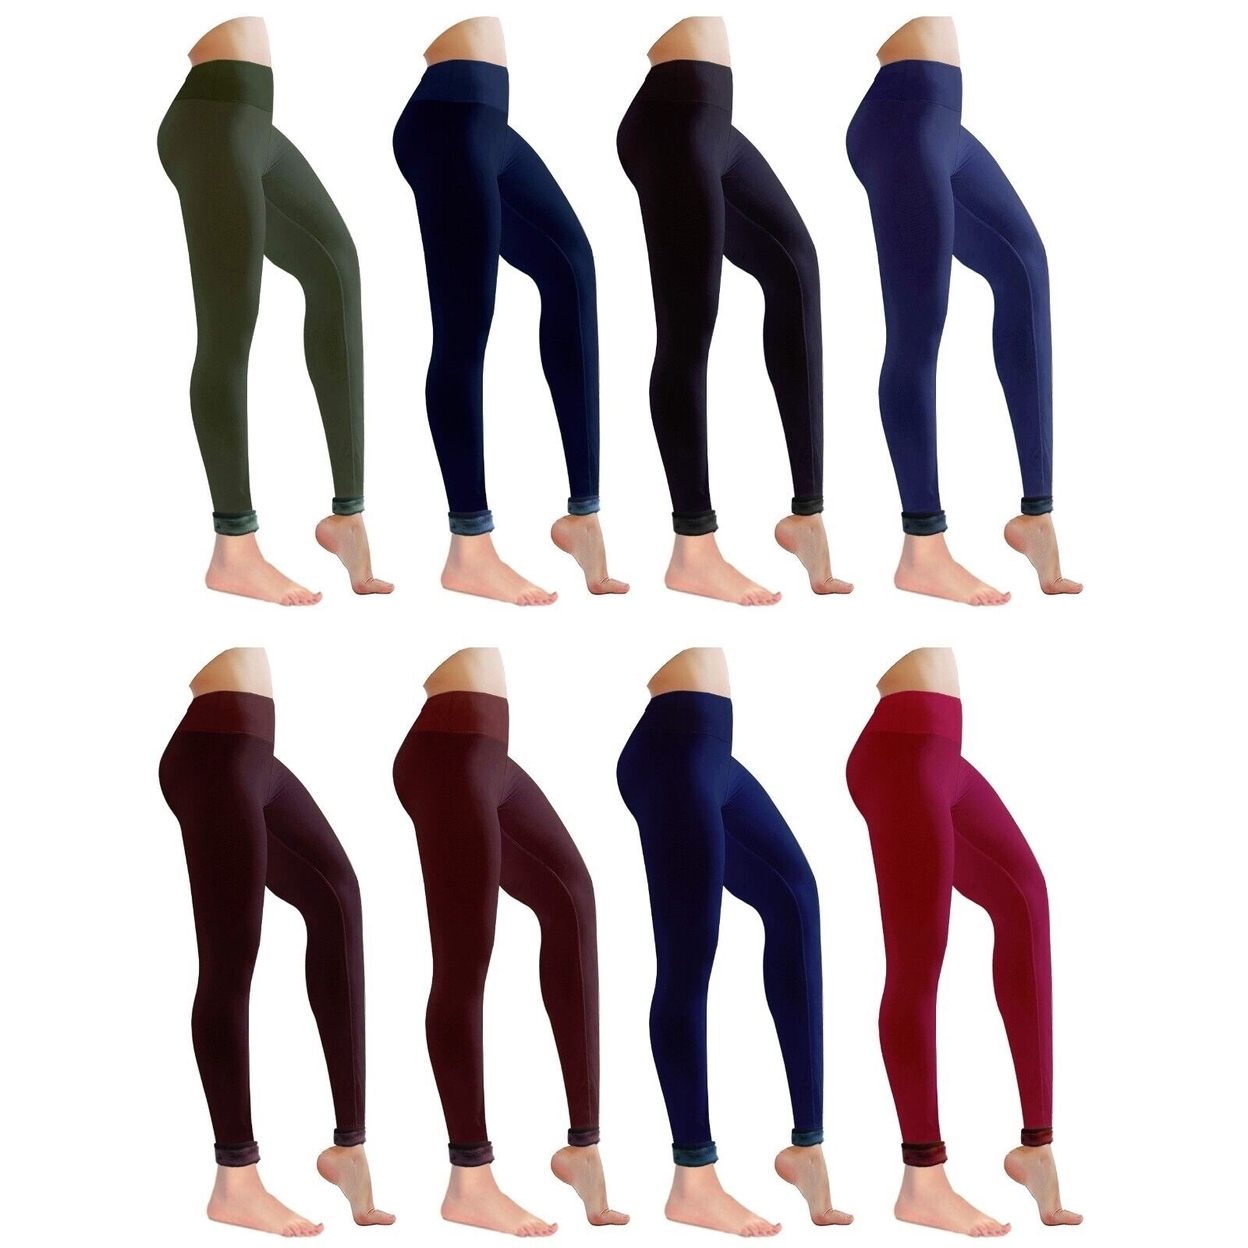 Multi-Pack: Women's Winter Warm Ultra Soft Cozy Fur Lined Leggings - Assorted, 3-pack, Small